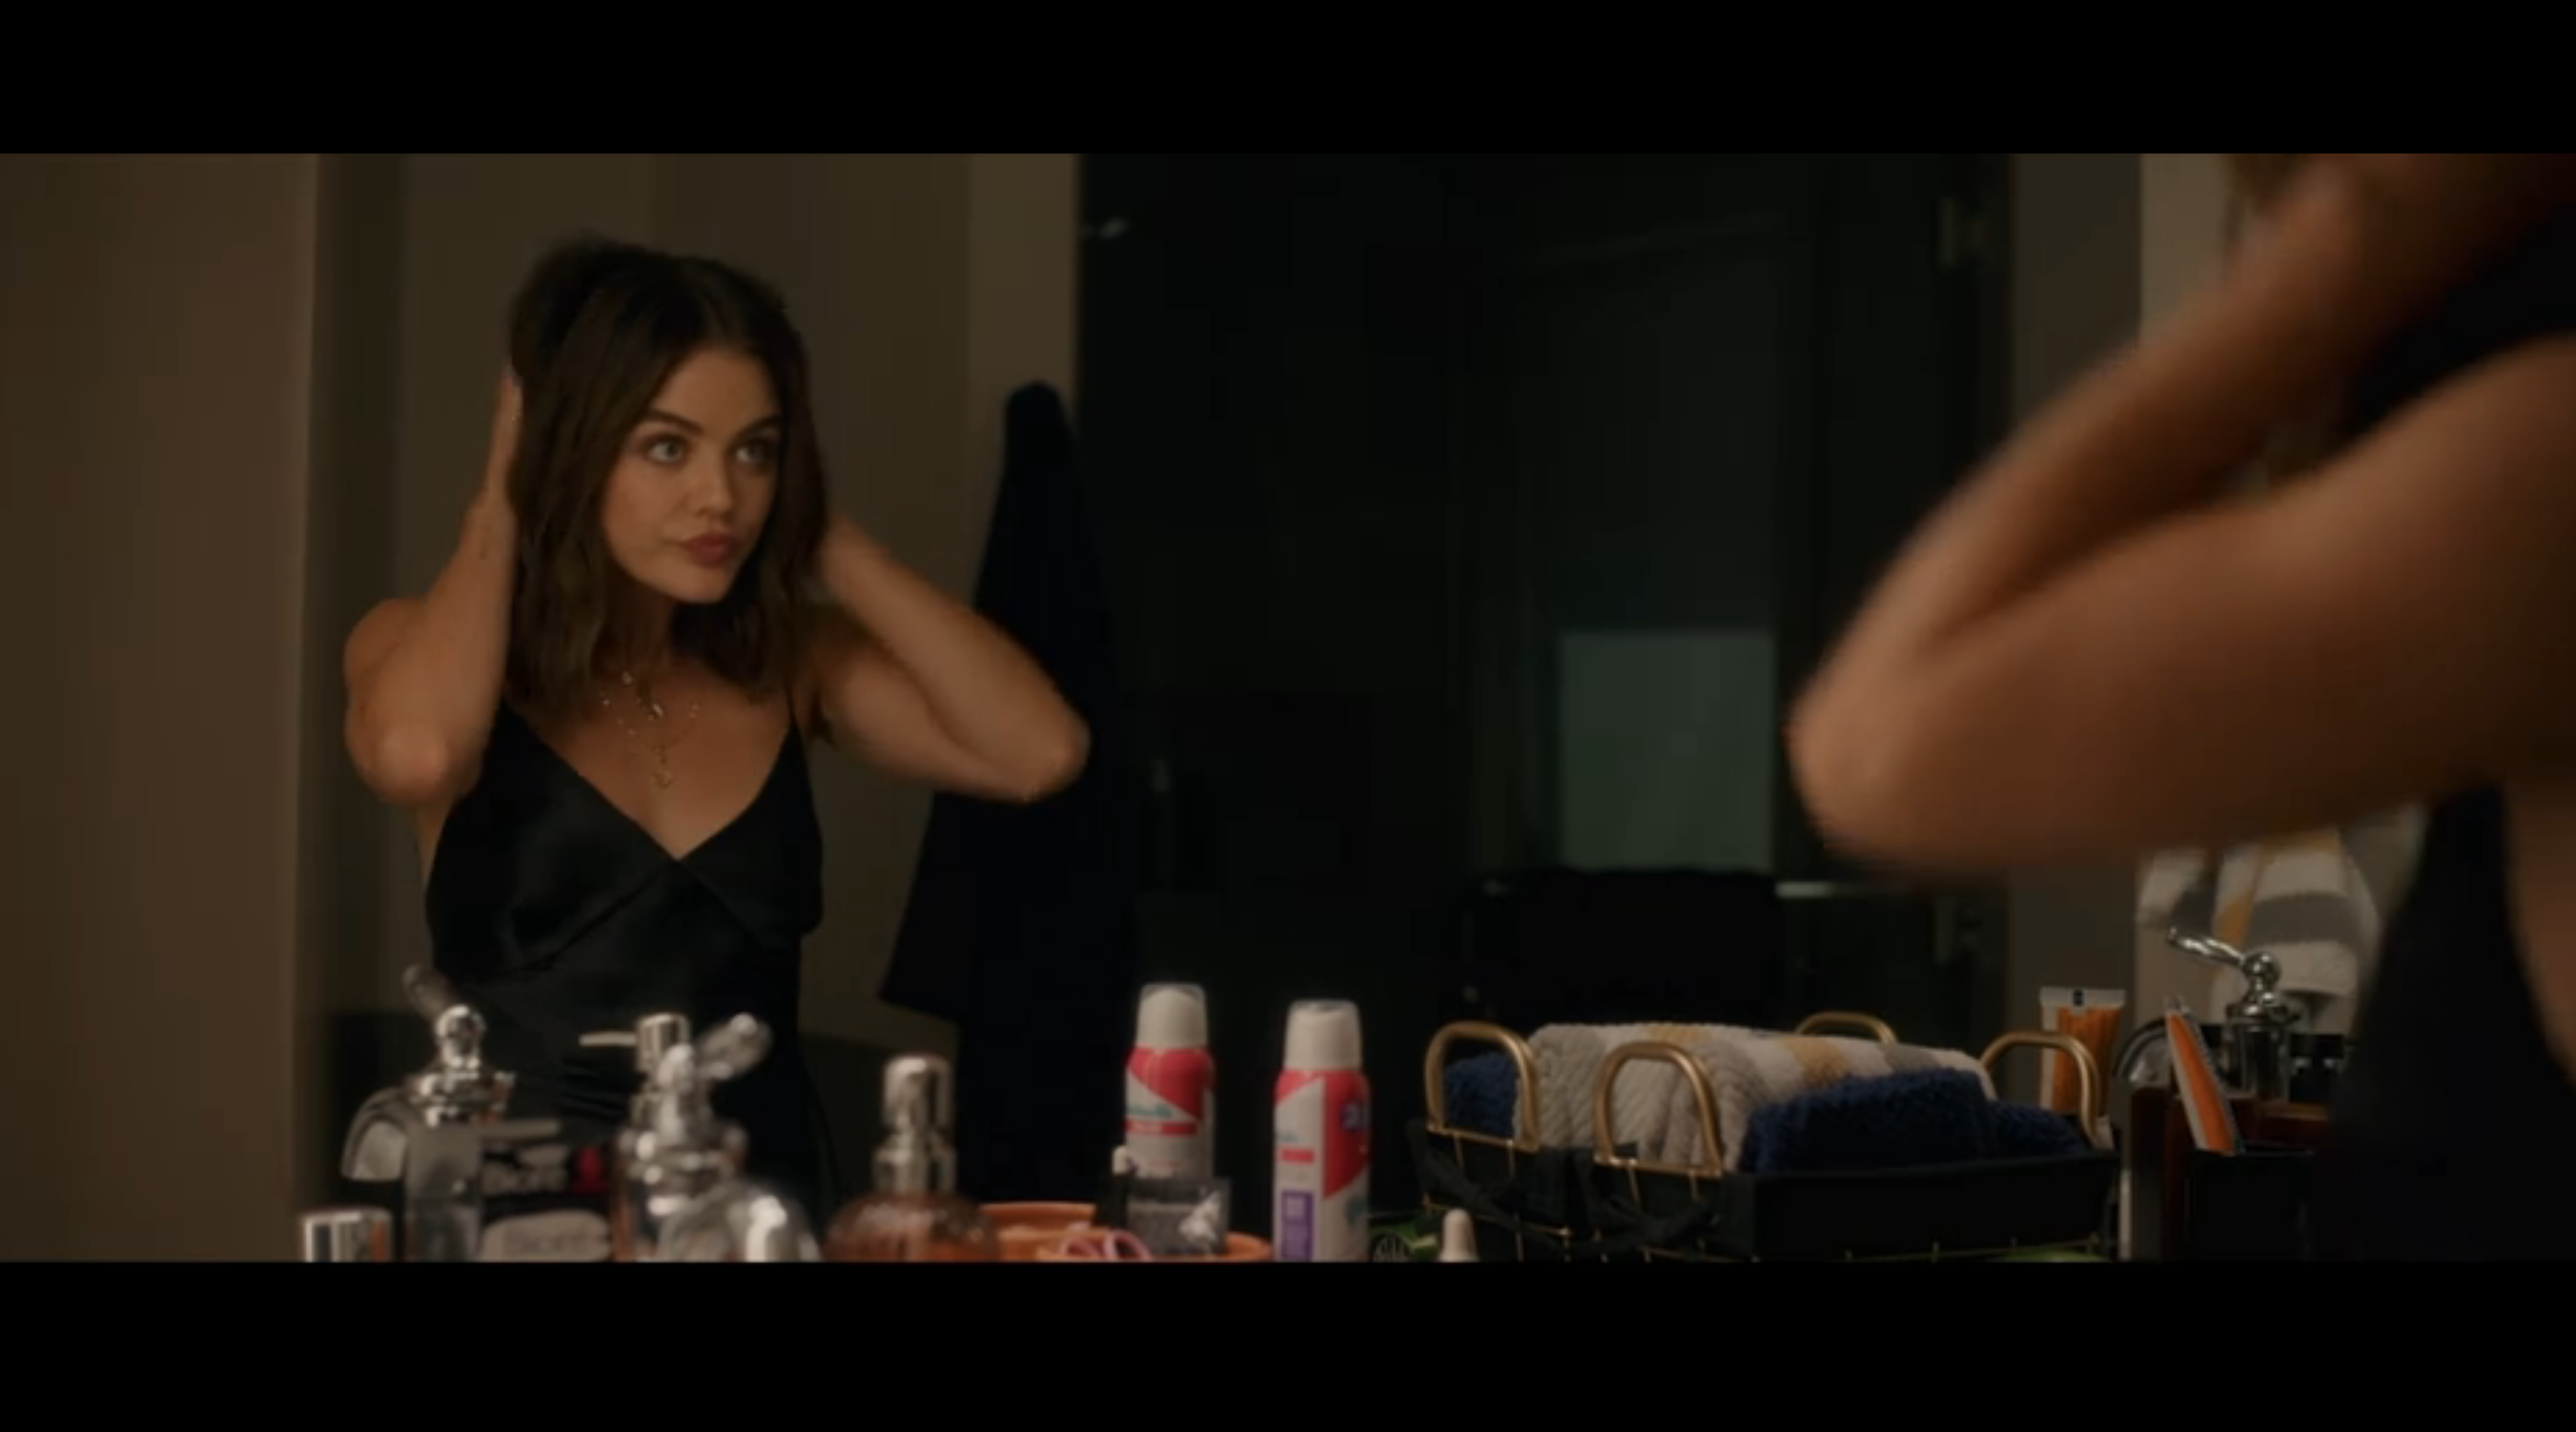 lucy hale fluffing hair in mirror, dressed up to go out